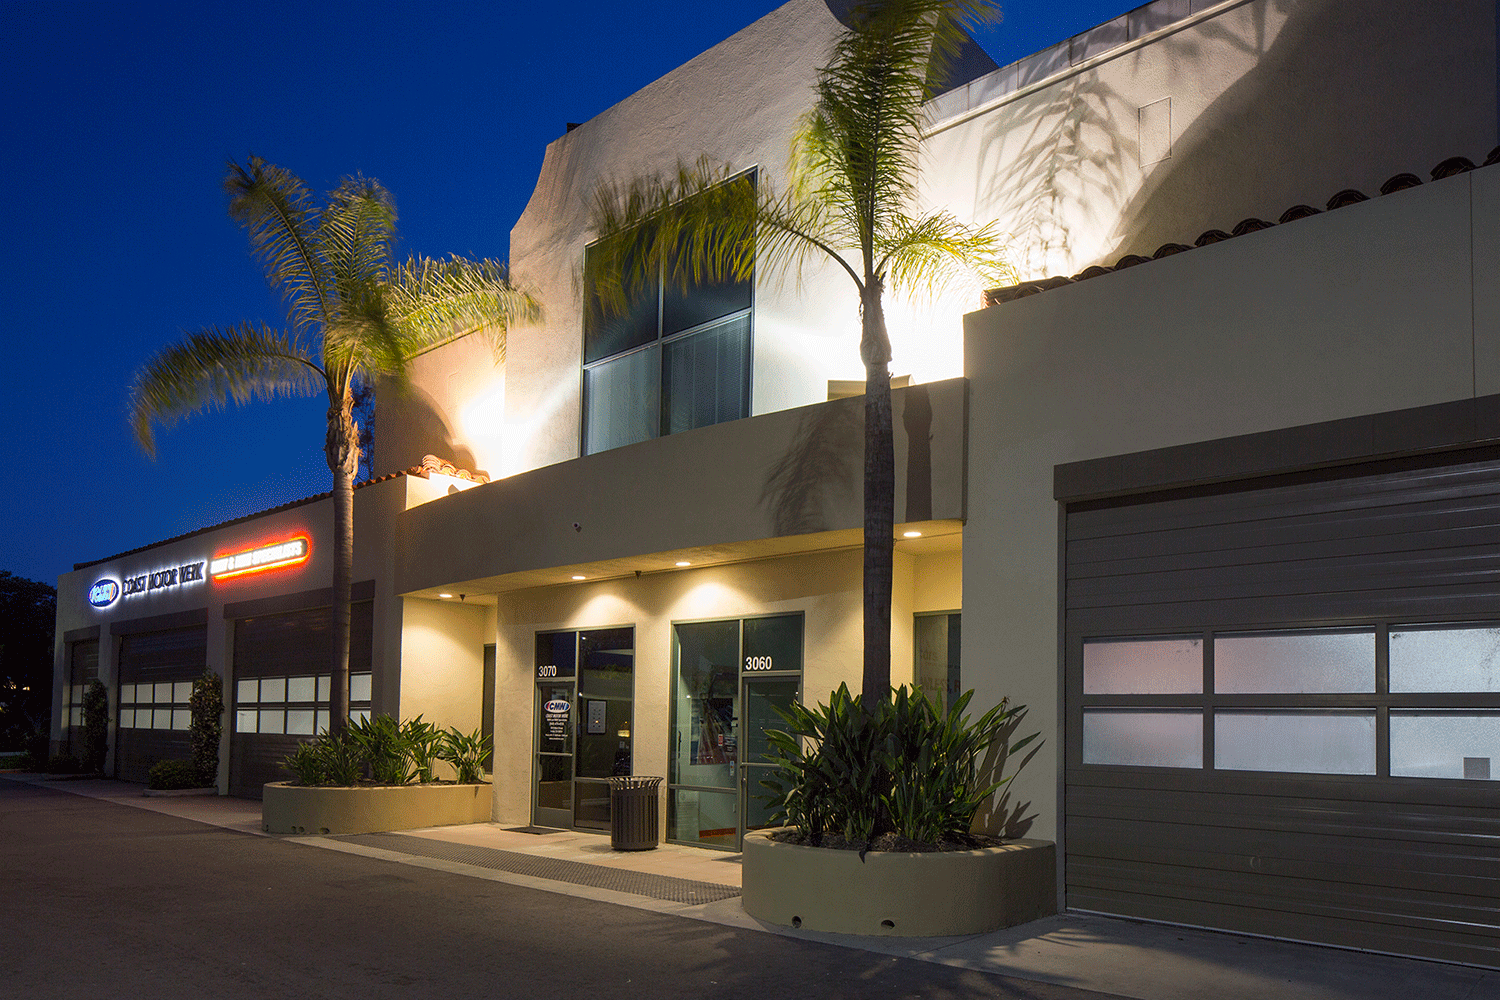  Exterior view at night of Harvard Place Auto Plaza